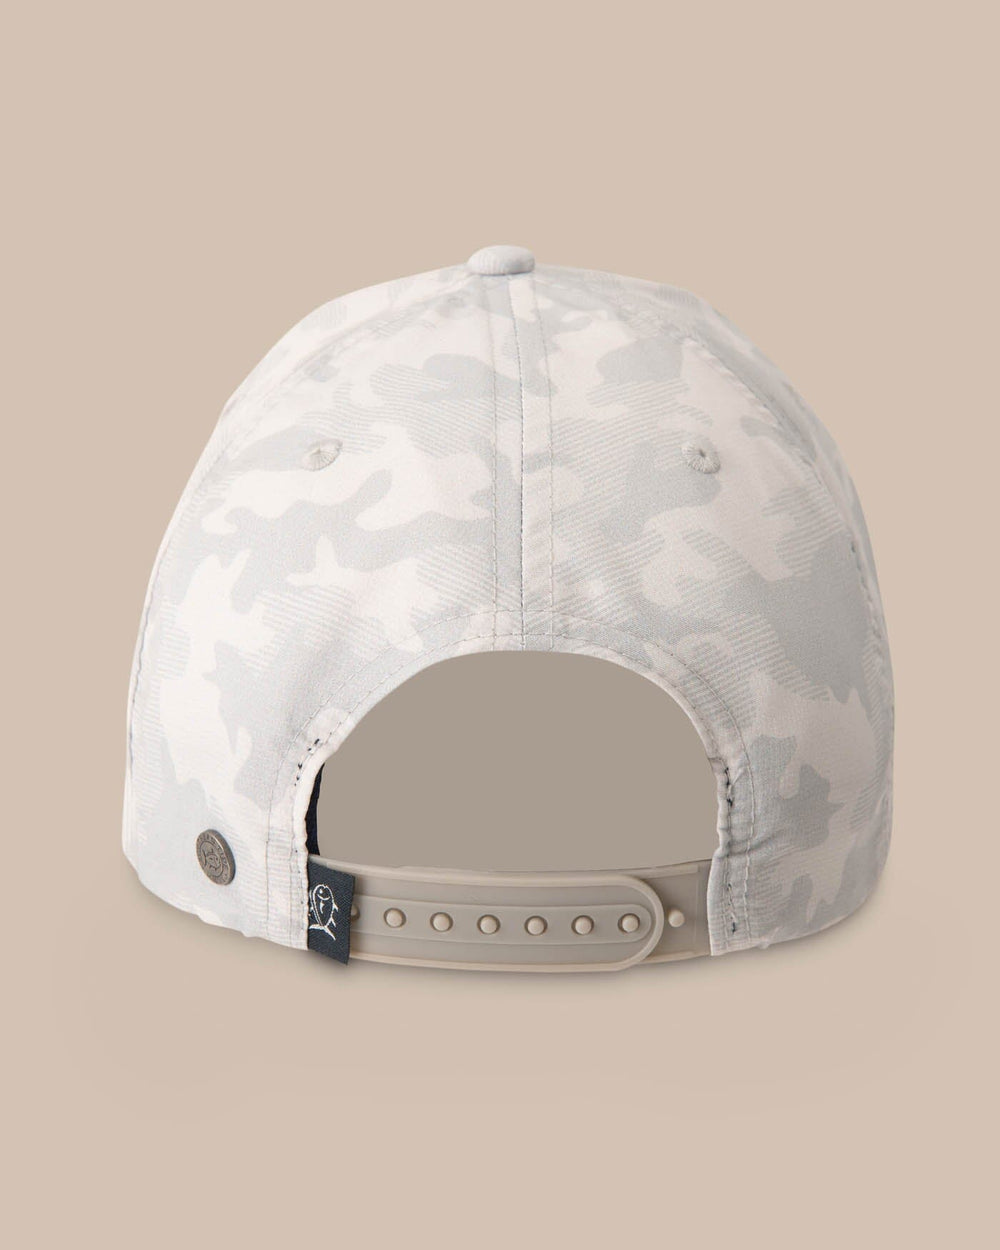 The back of the Camo Printed Performance Hat by Southern Tide - Seagull Grey